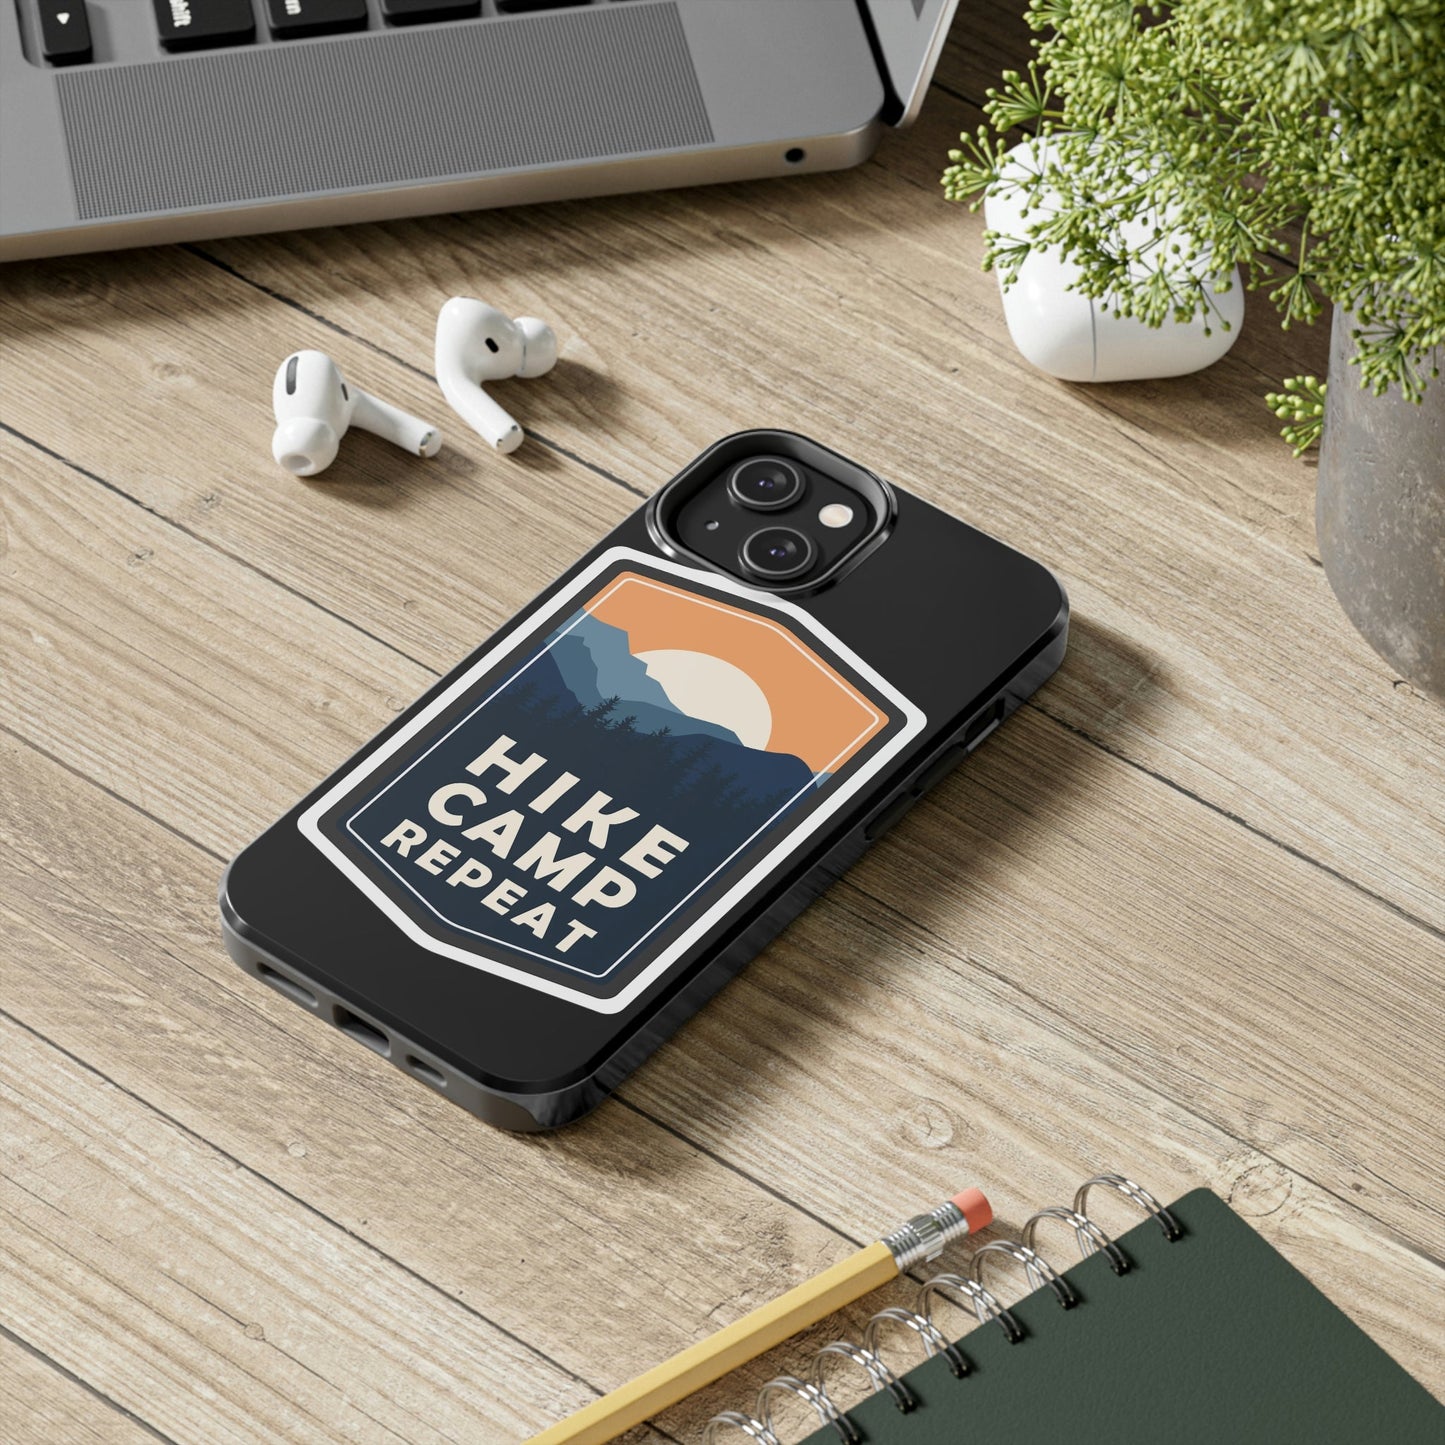 Hike Camp Repeat Hiking Lovers Graphic Tough Phone Cases Case-Mate Ichaku [Perfect Gifts Selection]